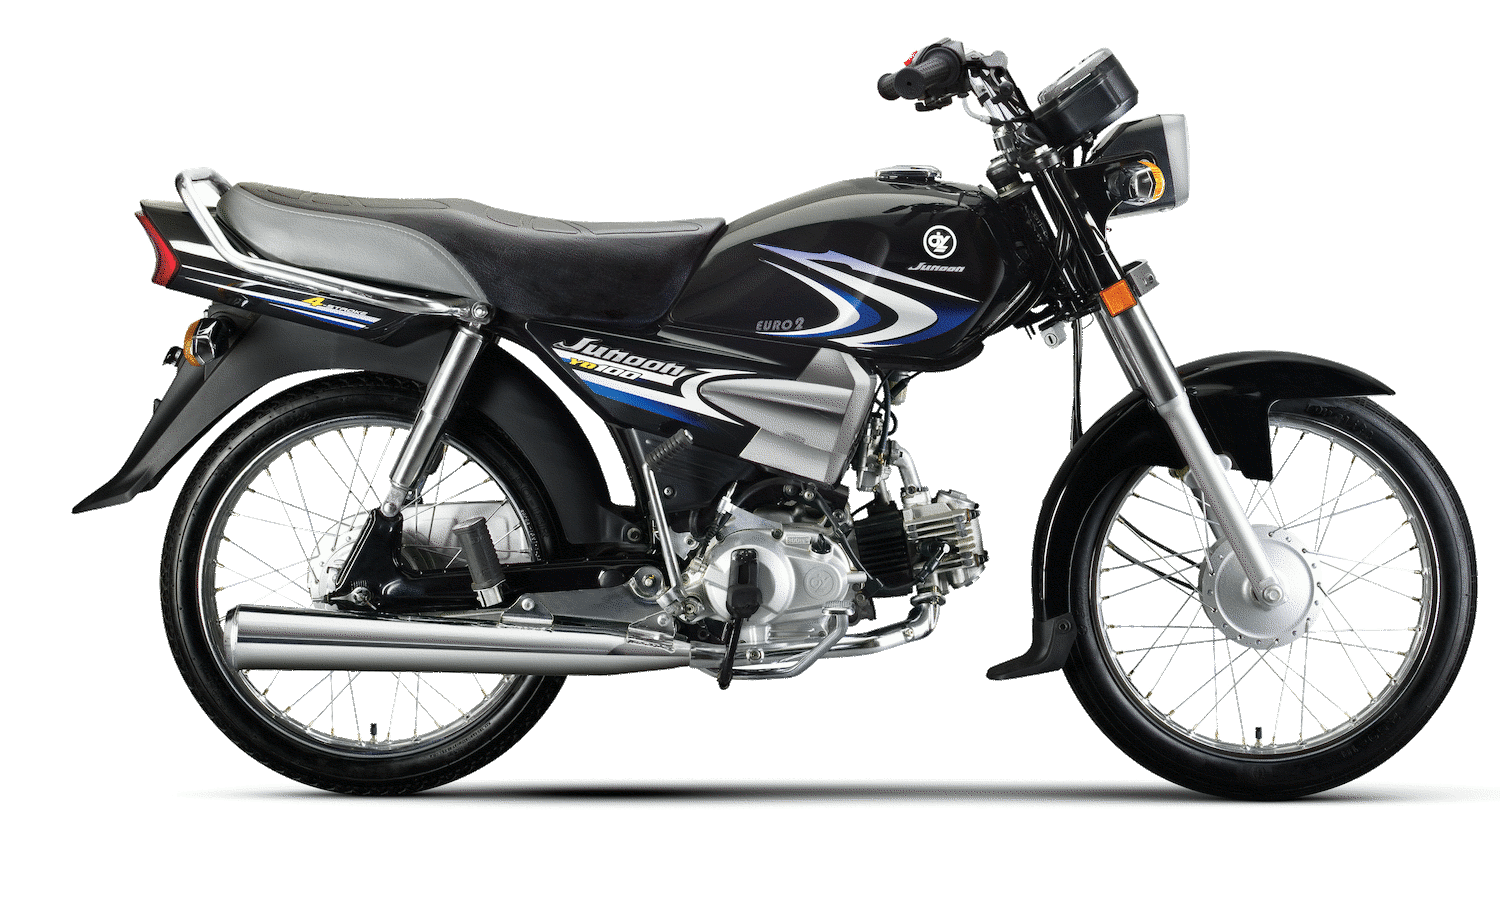 Yamaha YD-100 Junoon - Price in Pakistan, Specs and Pictures 